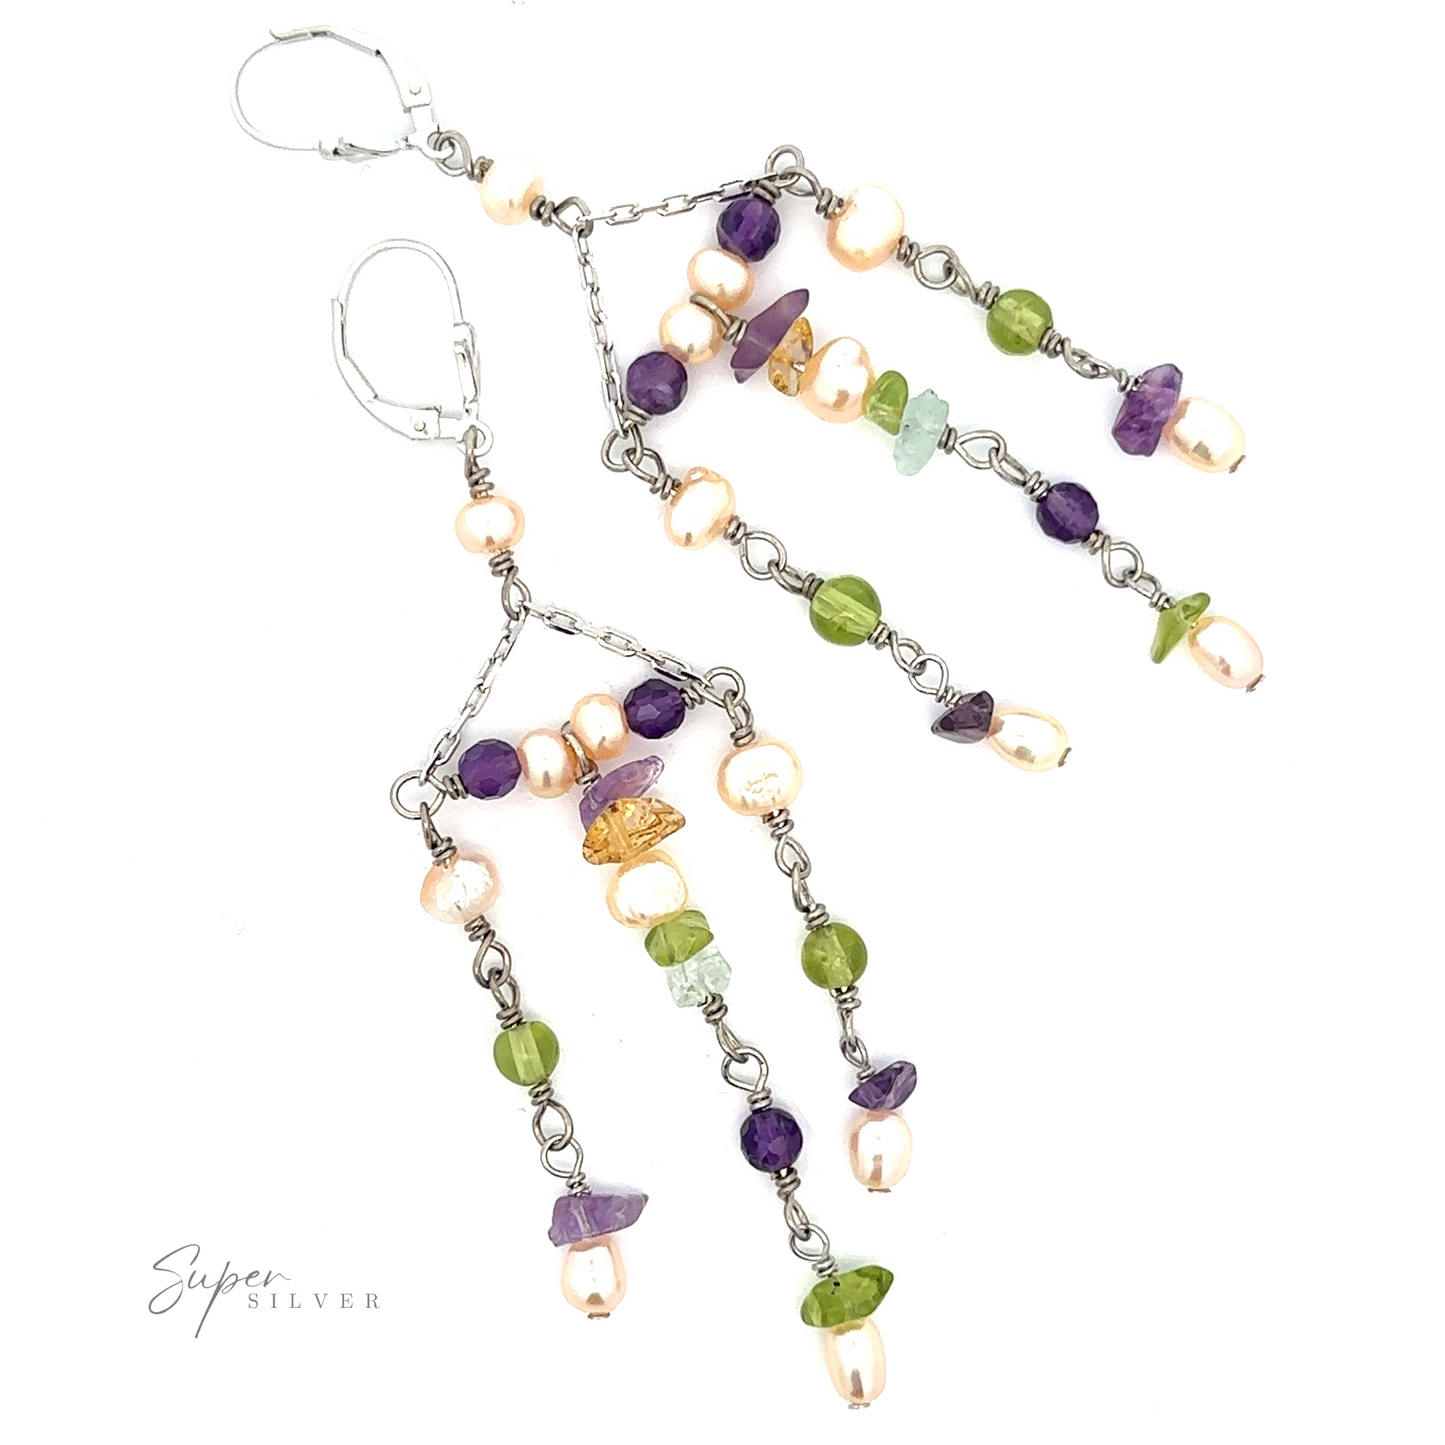 
                  
                    A pair of Dangly Multicolor Bead Earrings with sterling silver, multicolor beads in shades of purple, green, and peach, and leverback fastenings, perfect as festive earrings.
                  
                